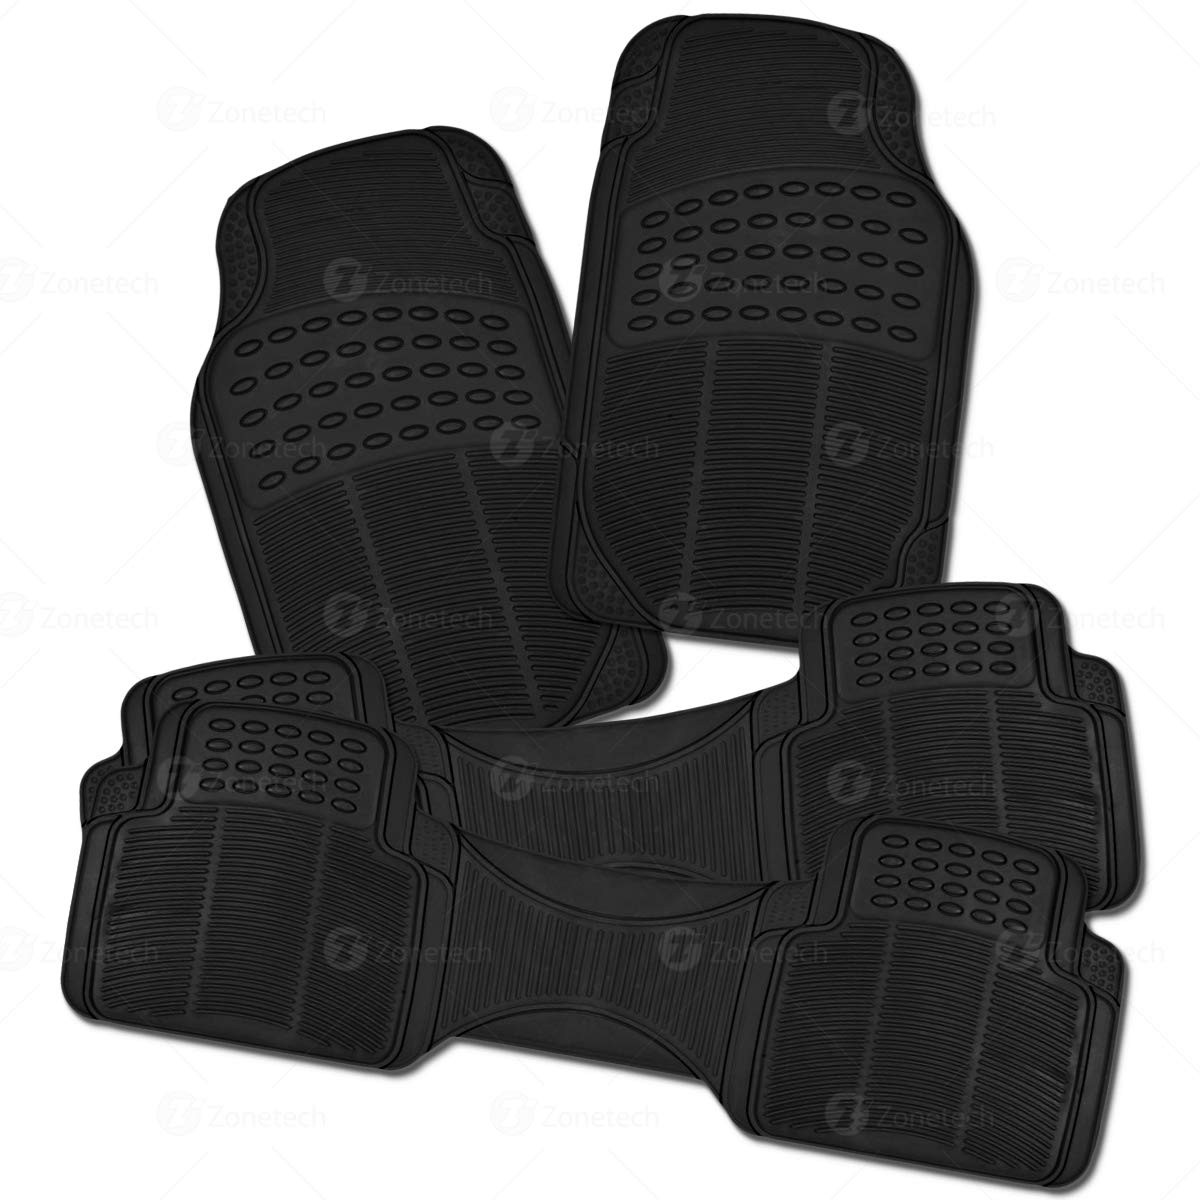 Black All Weather Full Rubber Trimable Large Floor Mat- 4 Piece